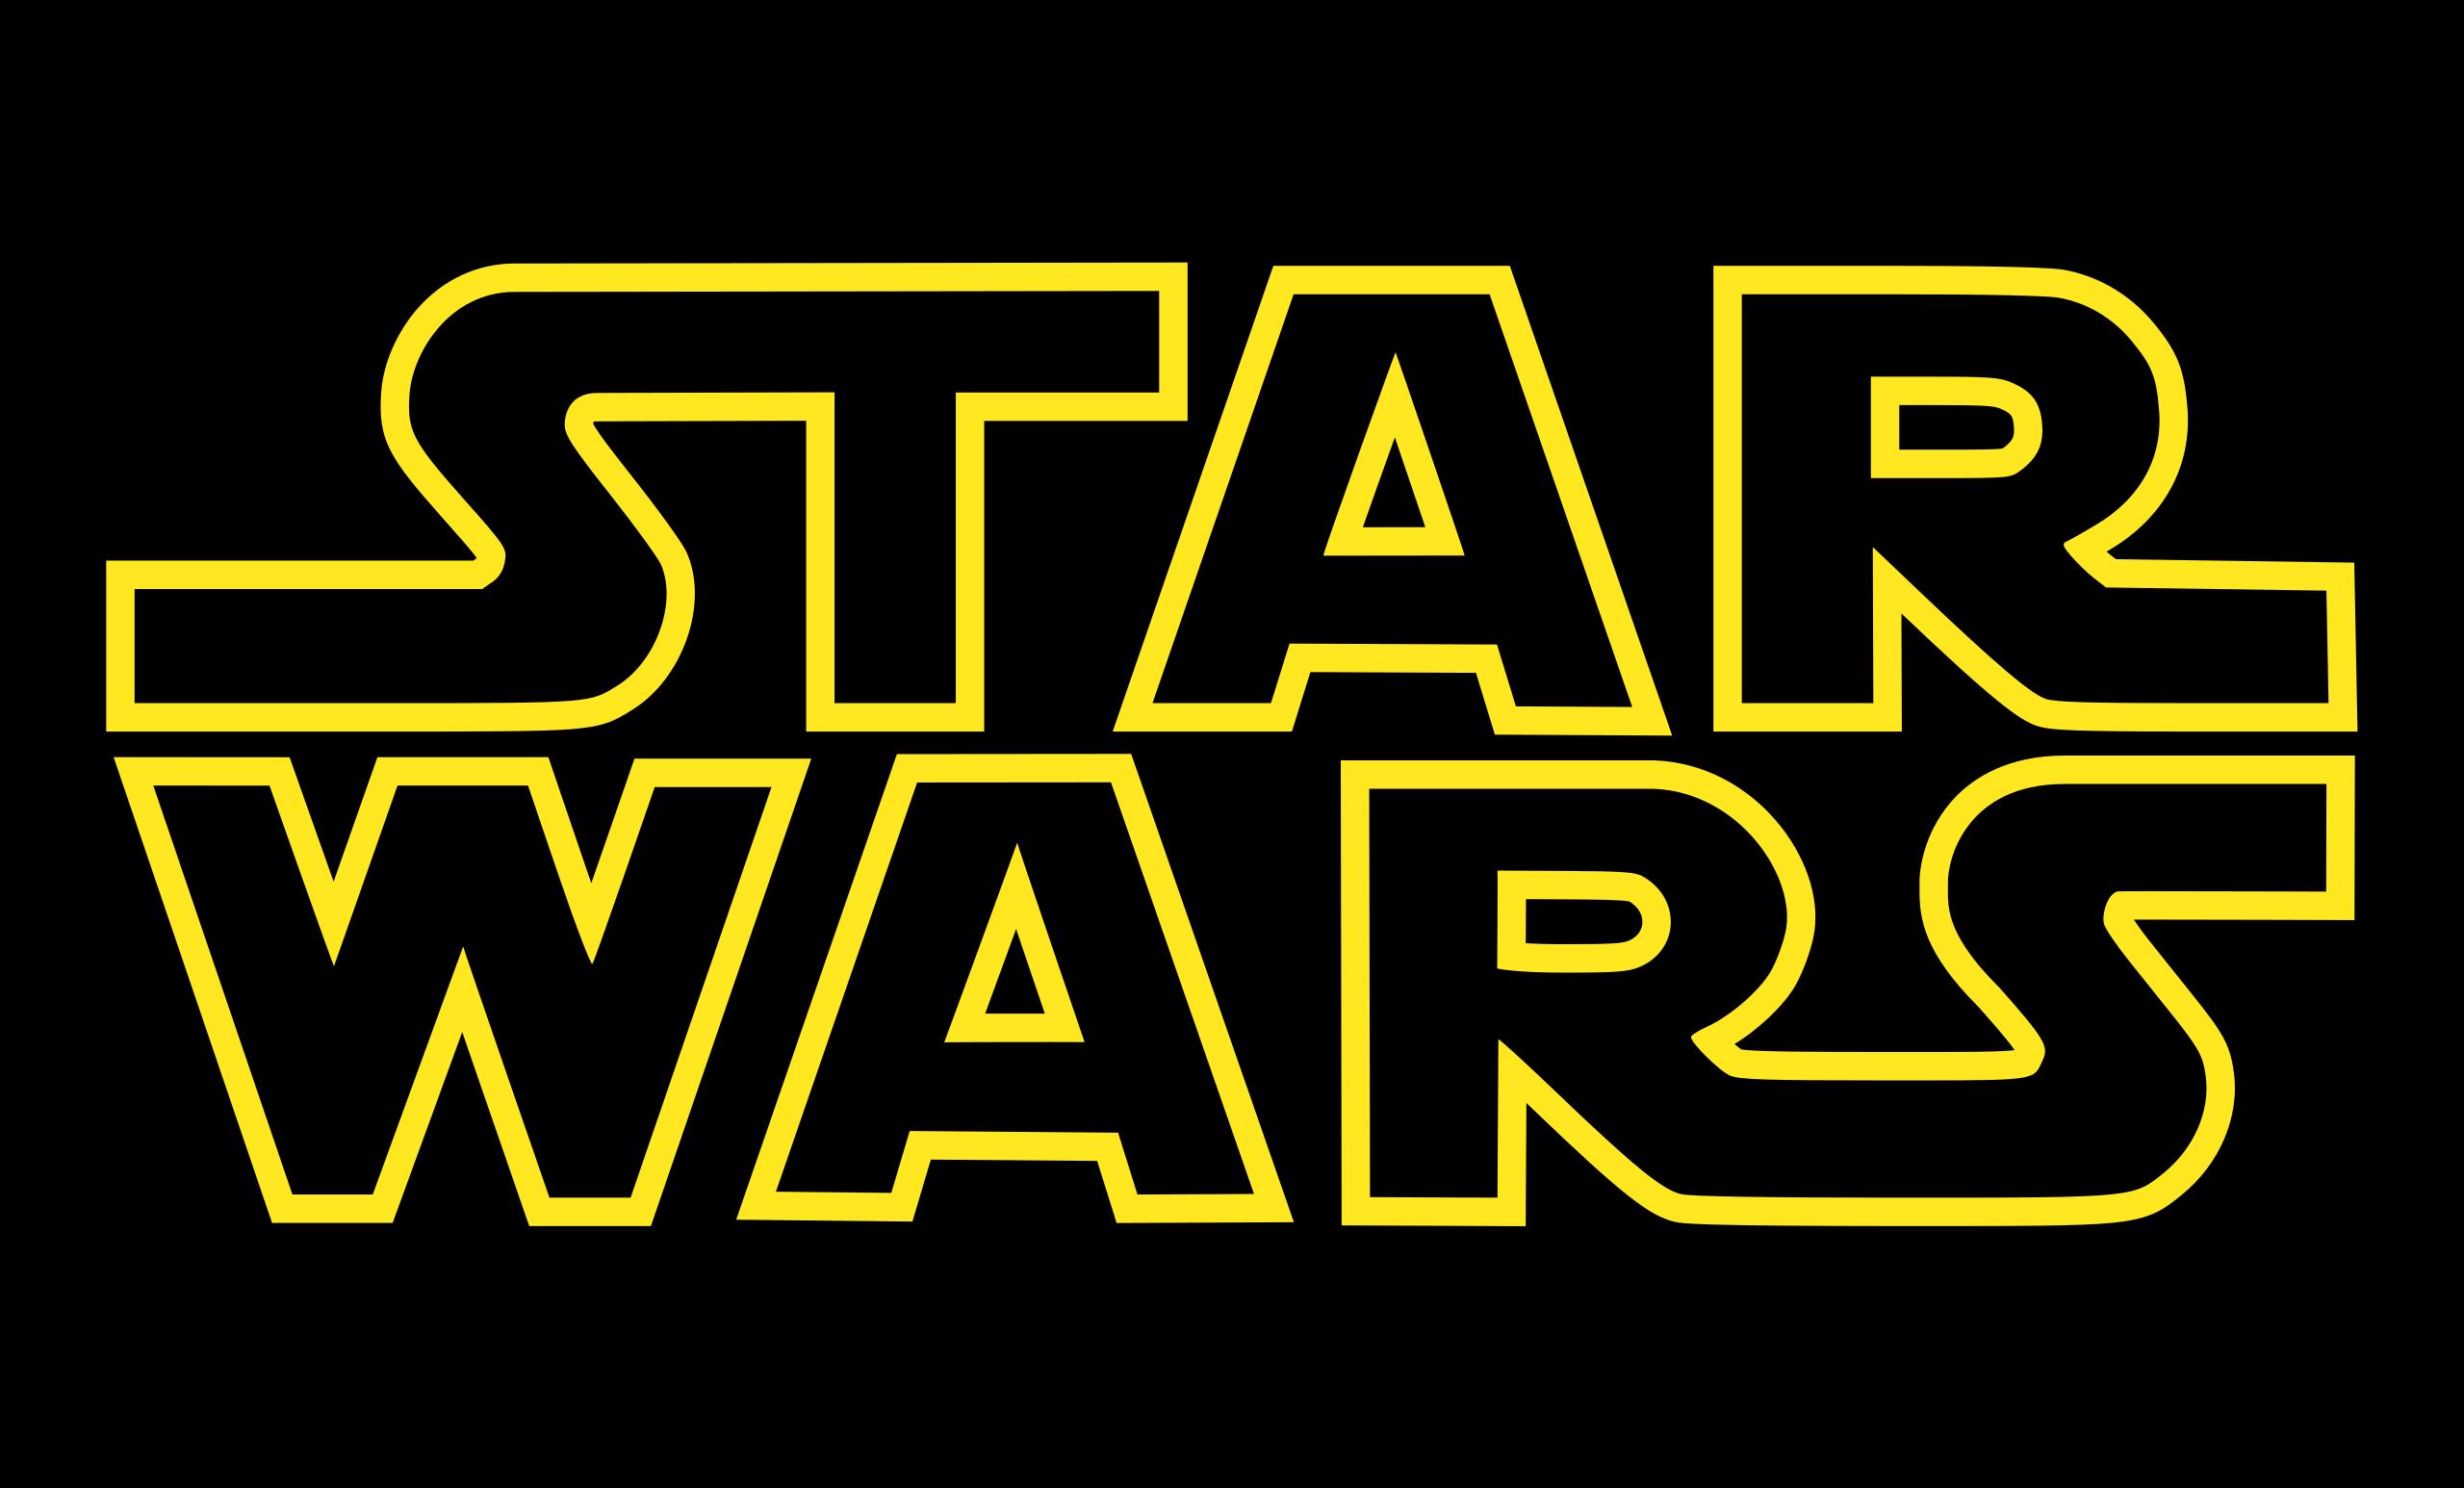 Star Wars Logo: An Ultimate Guide for Fans